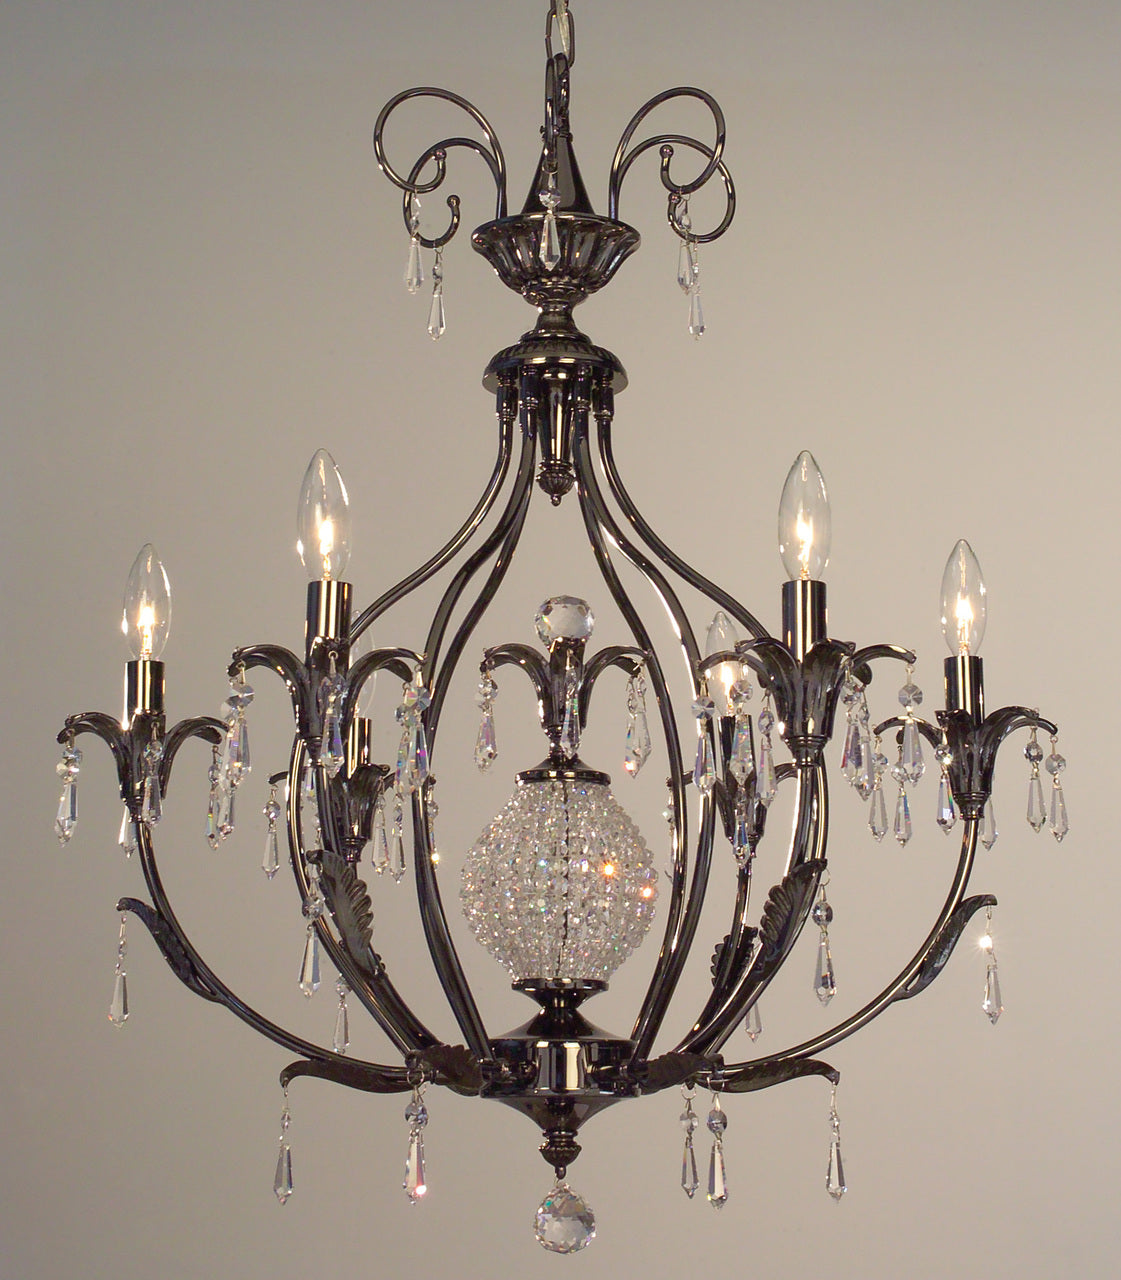 Classic Lighting 16116 EP CP Sharon Crystal Chandelier in Ebony Pearl